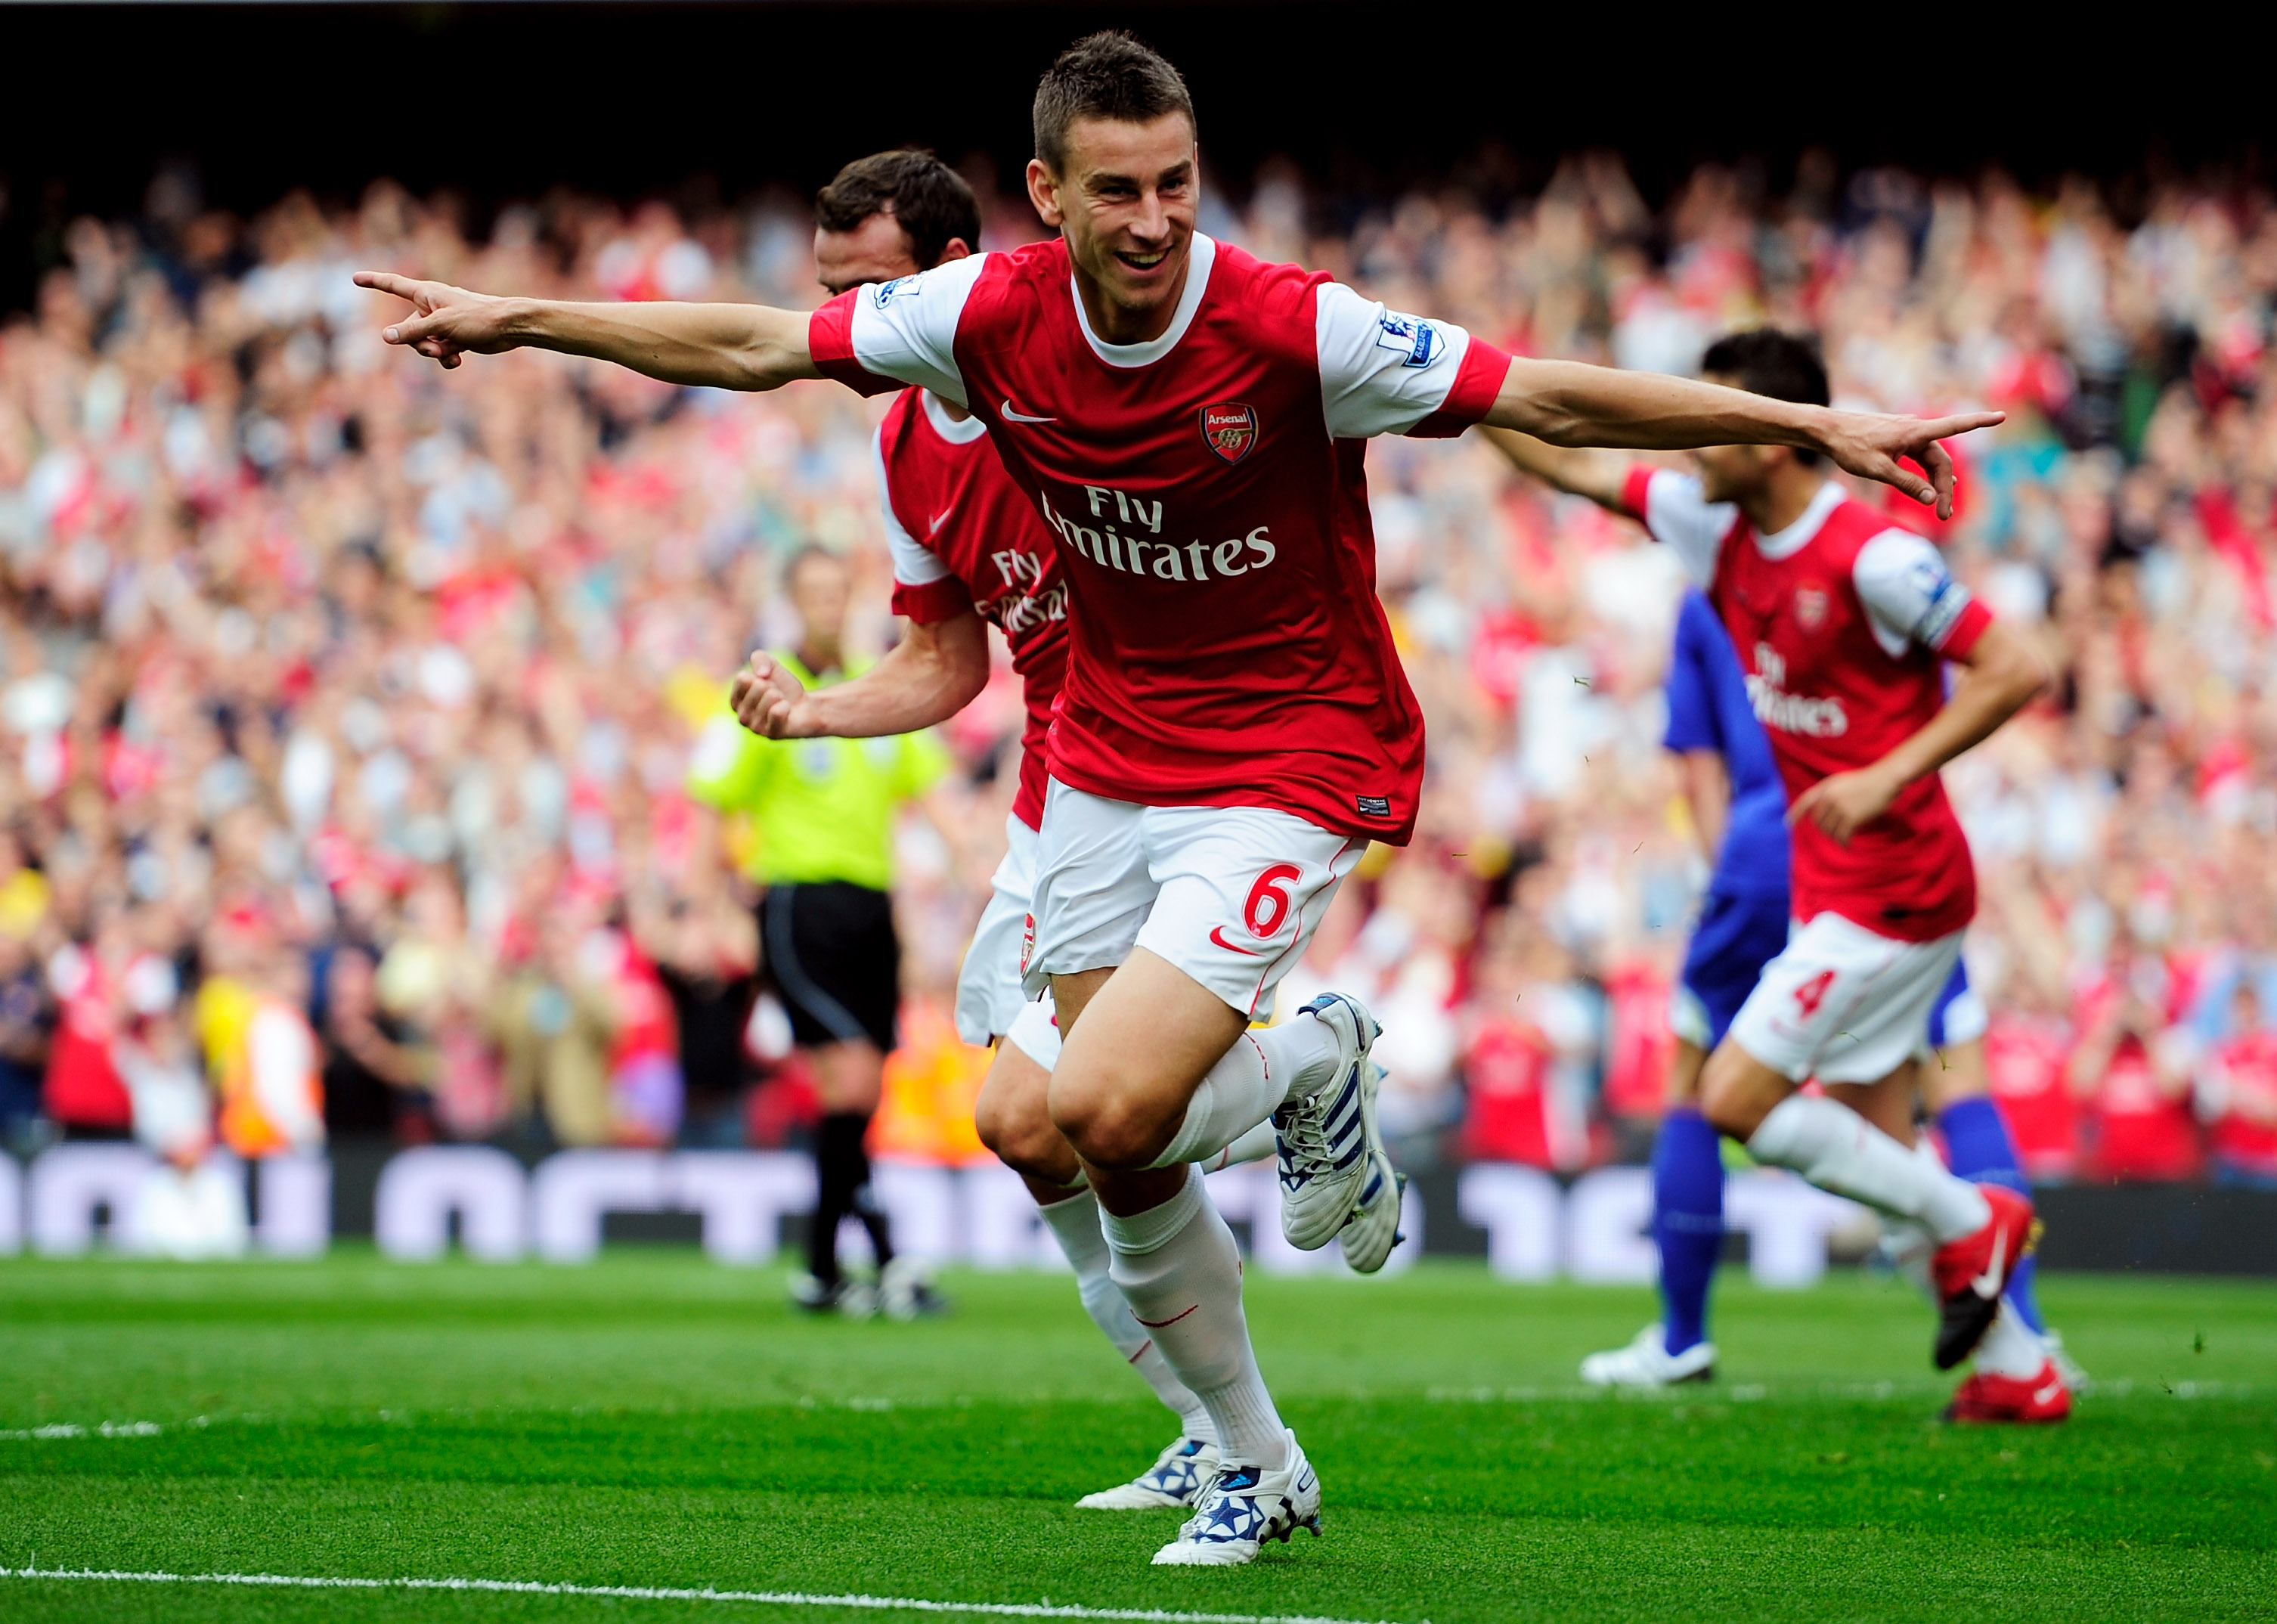 LONDON, ENGLAND - SEPTEMBER 11:  Laurent Koscielny of Arsenal celebrates after he scores the first goal of the game during the Barclays Premier League match between Arsenal and Bolton Wanderers at The Emirates Stadium on September 11, 2010 in London, Engl